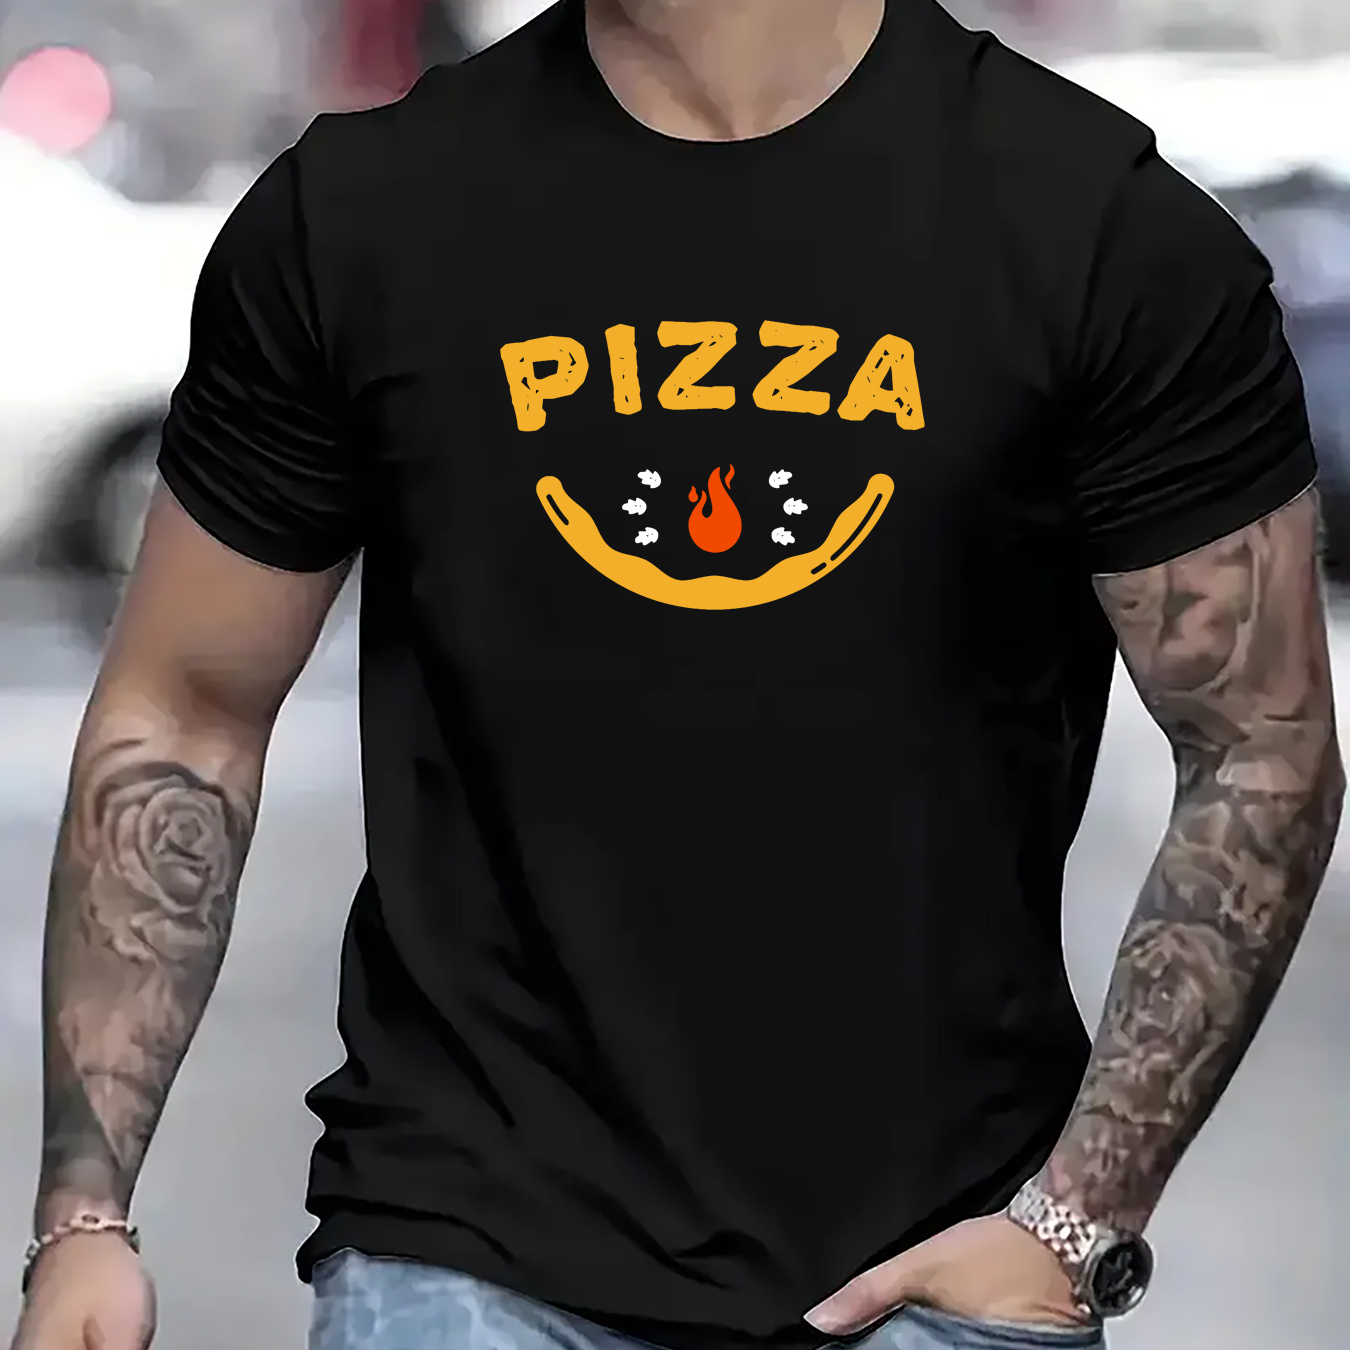 

Pizza Print T Shirt, Tees For Men, Casual Short Sleeve T-shirt For Summer